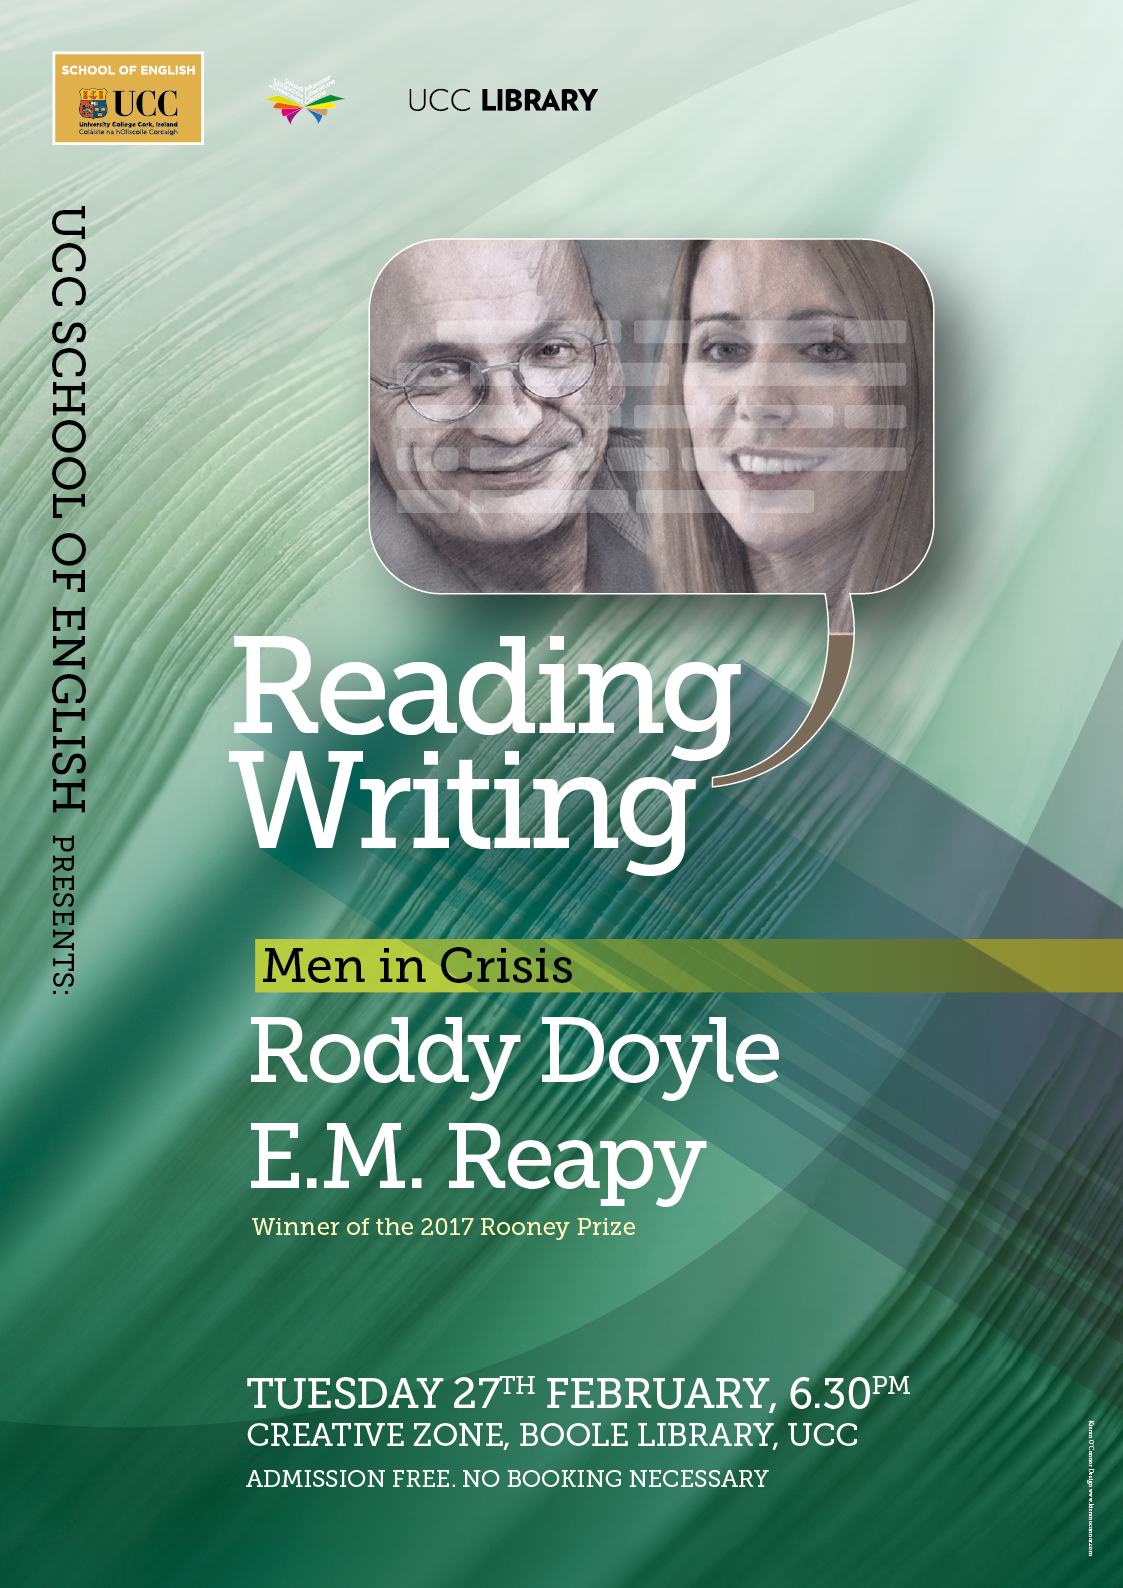 Featuring Booker Prize winner Roddy Doyle and Rooney Prize winner E. M. Reapy.